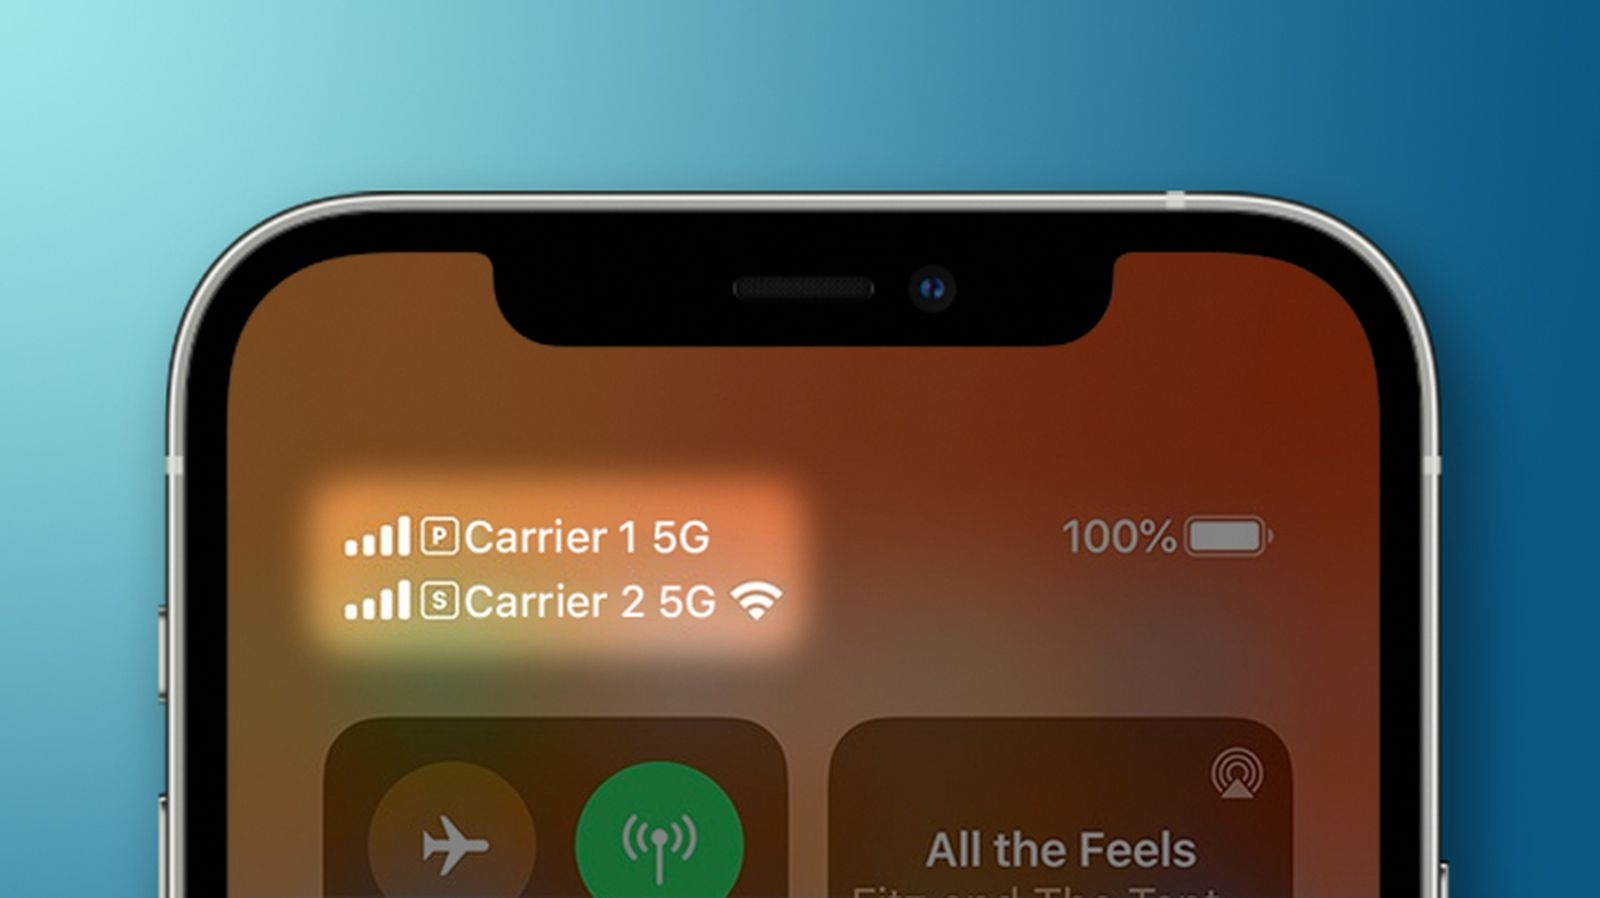 How to Use New Fascinating Features on iOS 14.5?